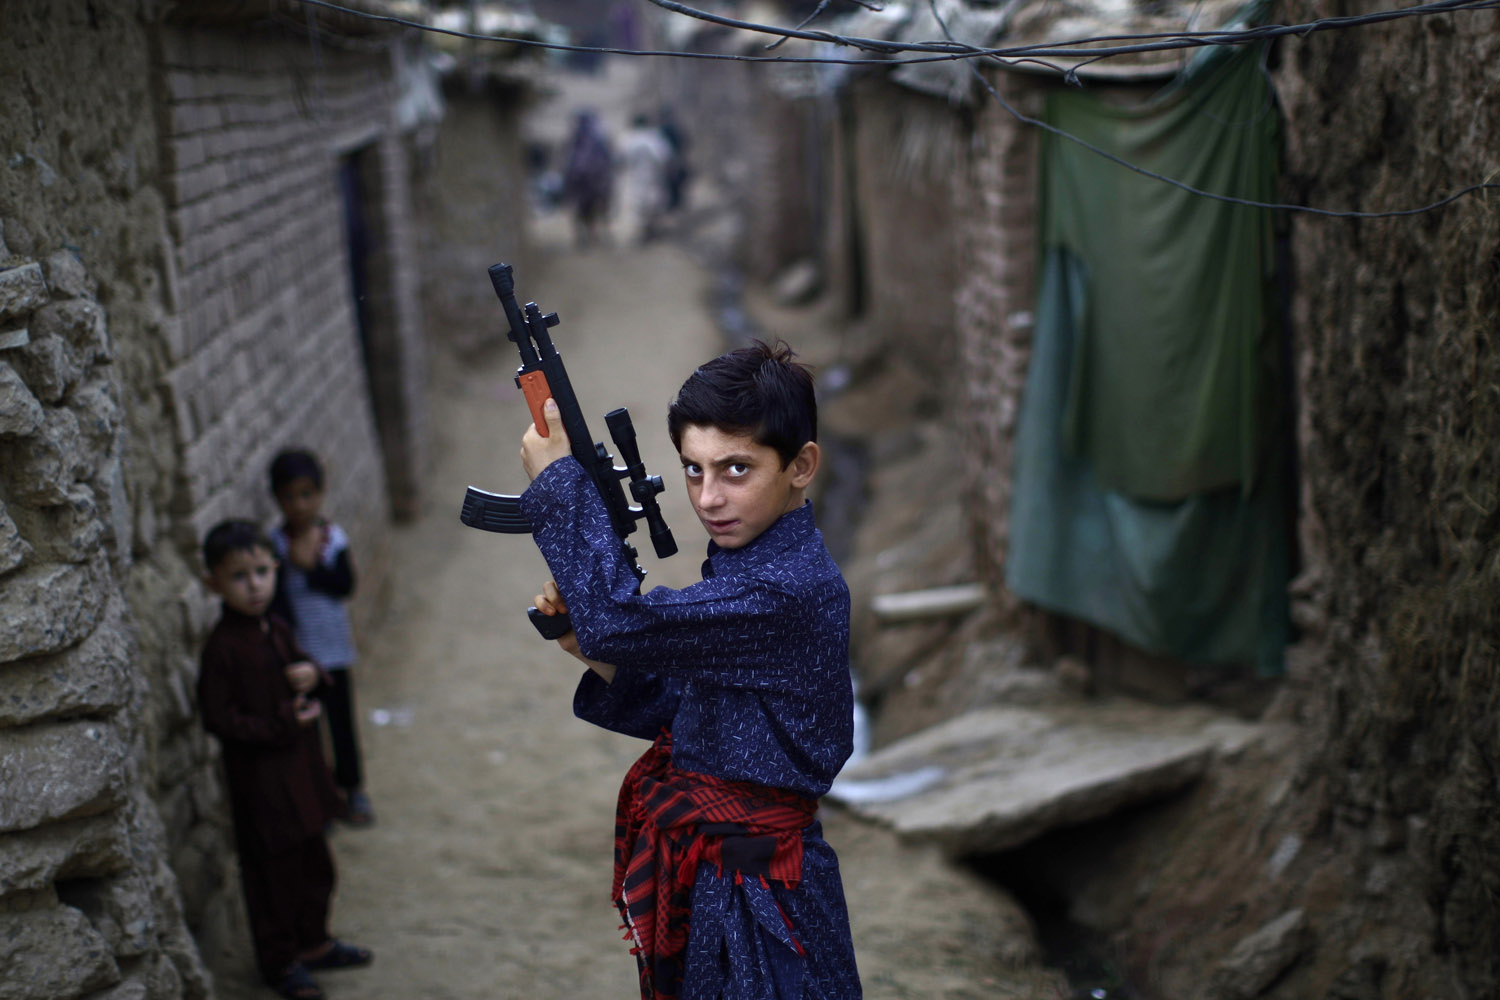 Aug. 20, 2012. A young Afghan refugee poses with a plastic rifle as he and other children celebrate the first day of the Eid al-Fitr festival, which marks the end of the Muslim fasting month of Ramadan, in a slum on the outskirts of Islamabad.